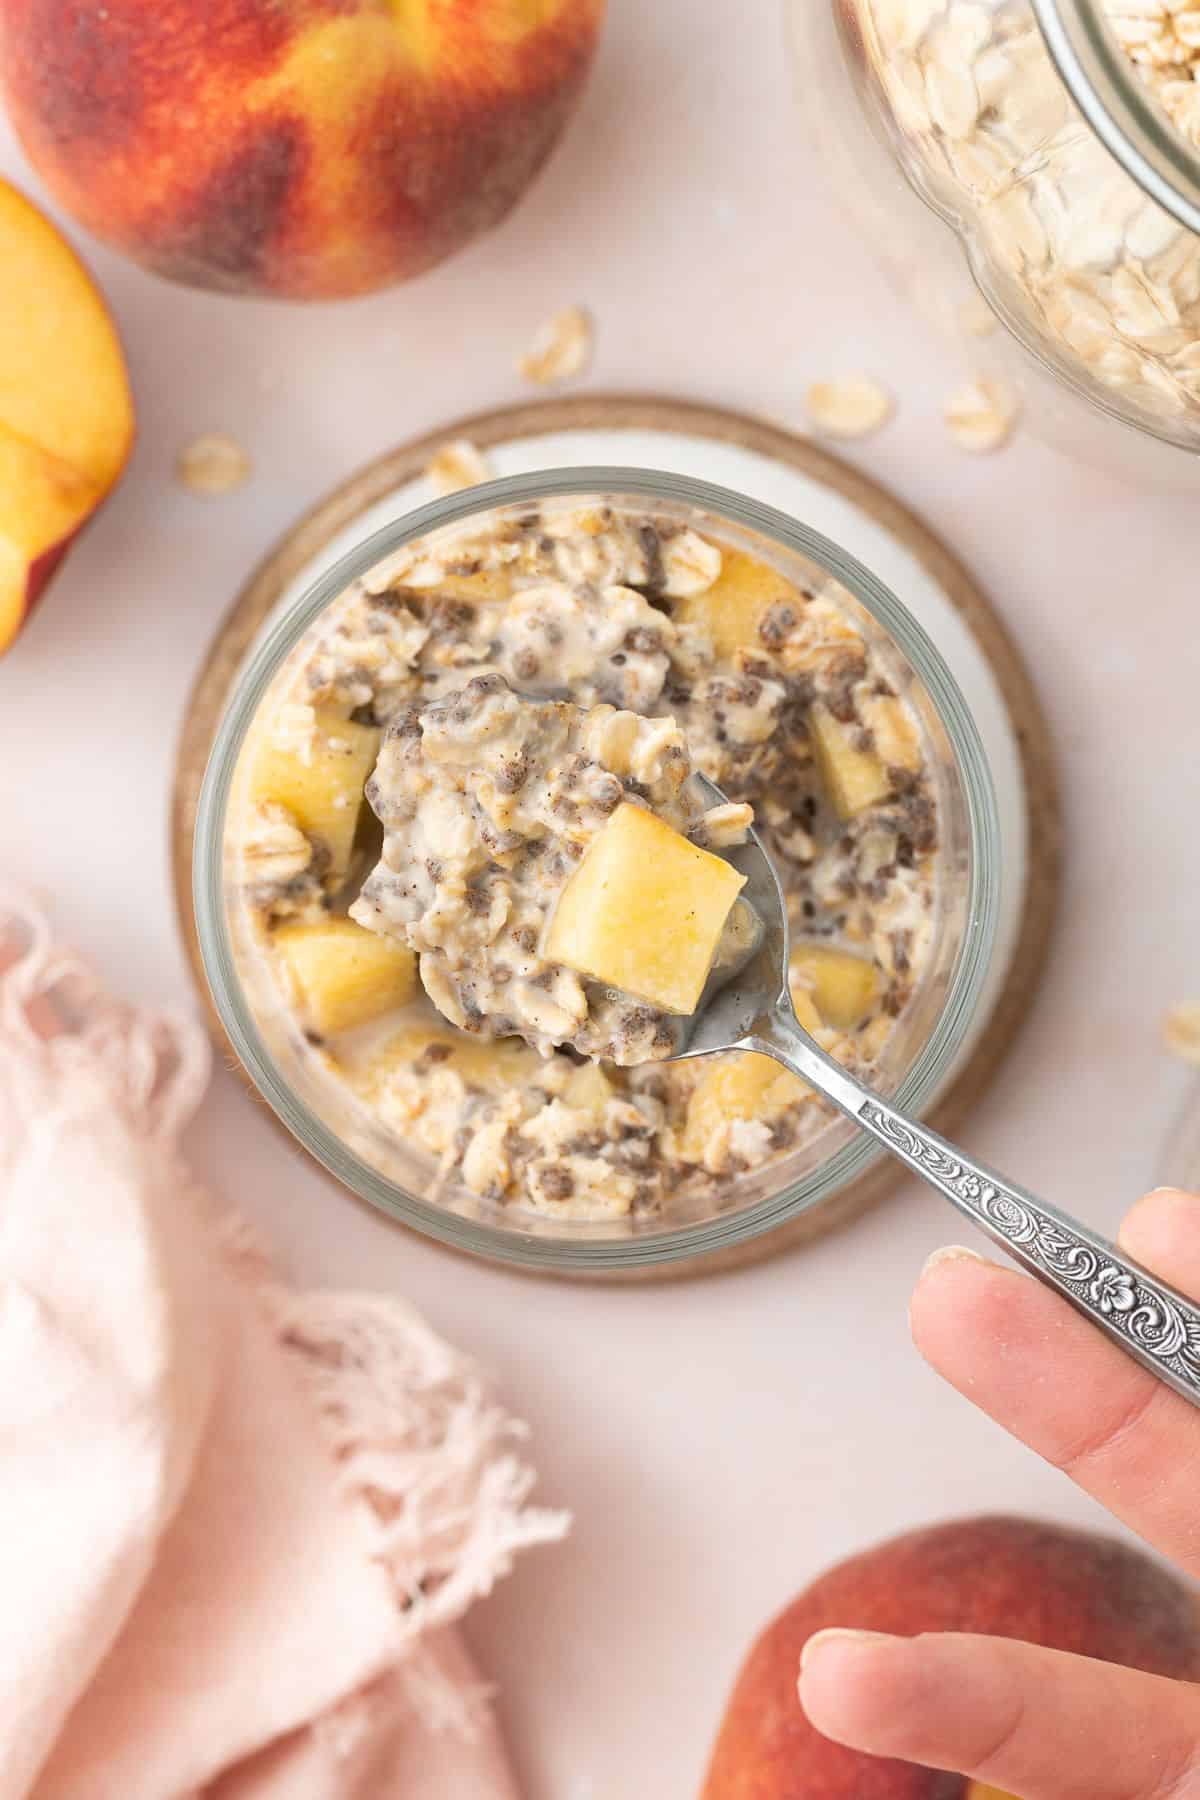 Spoon dipping into jar of peach overnight oats.